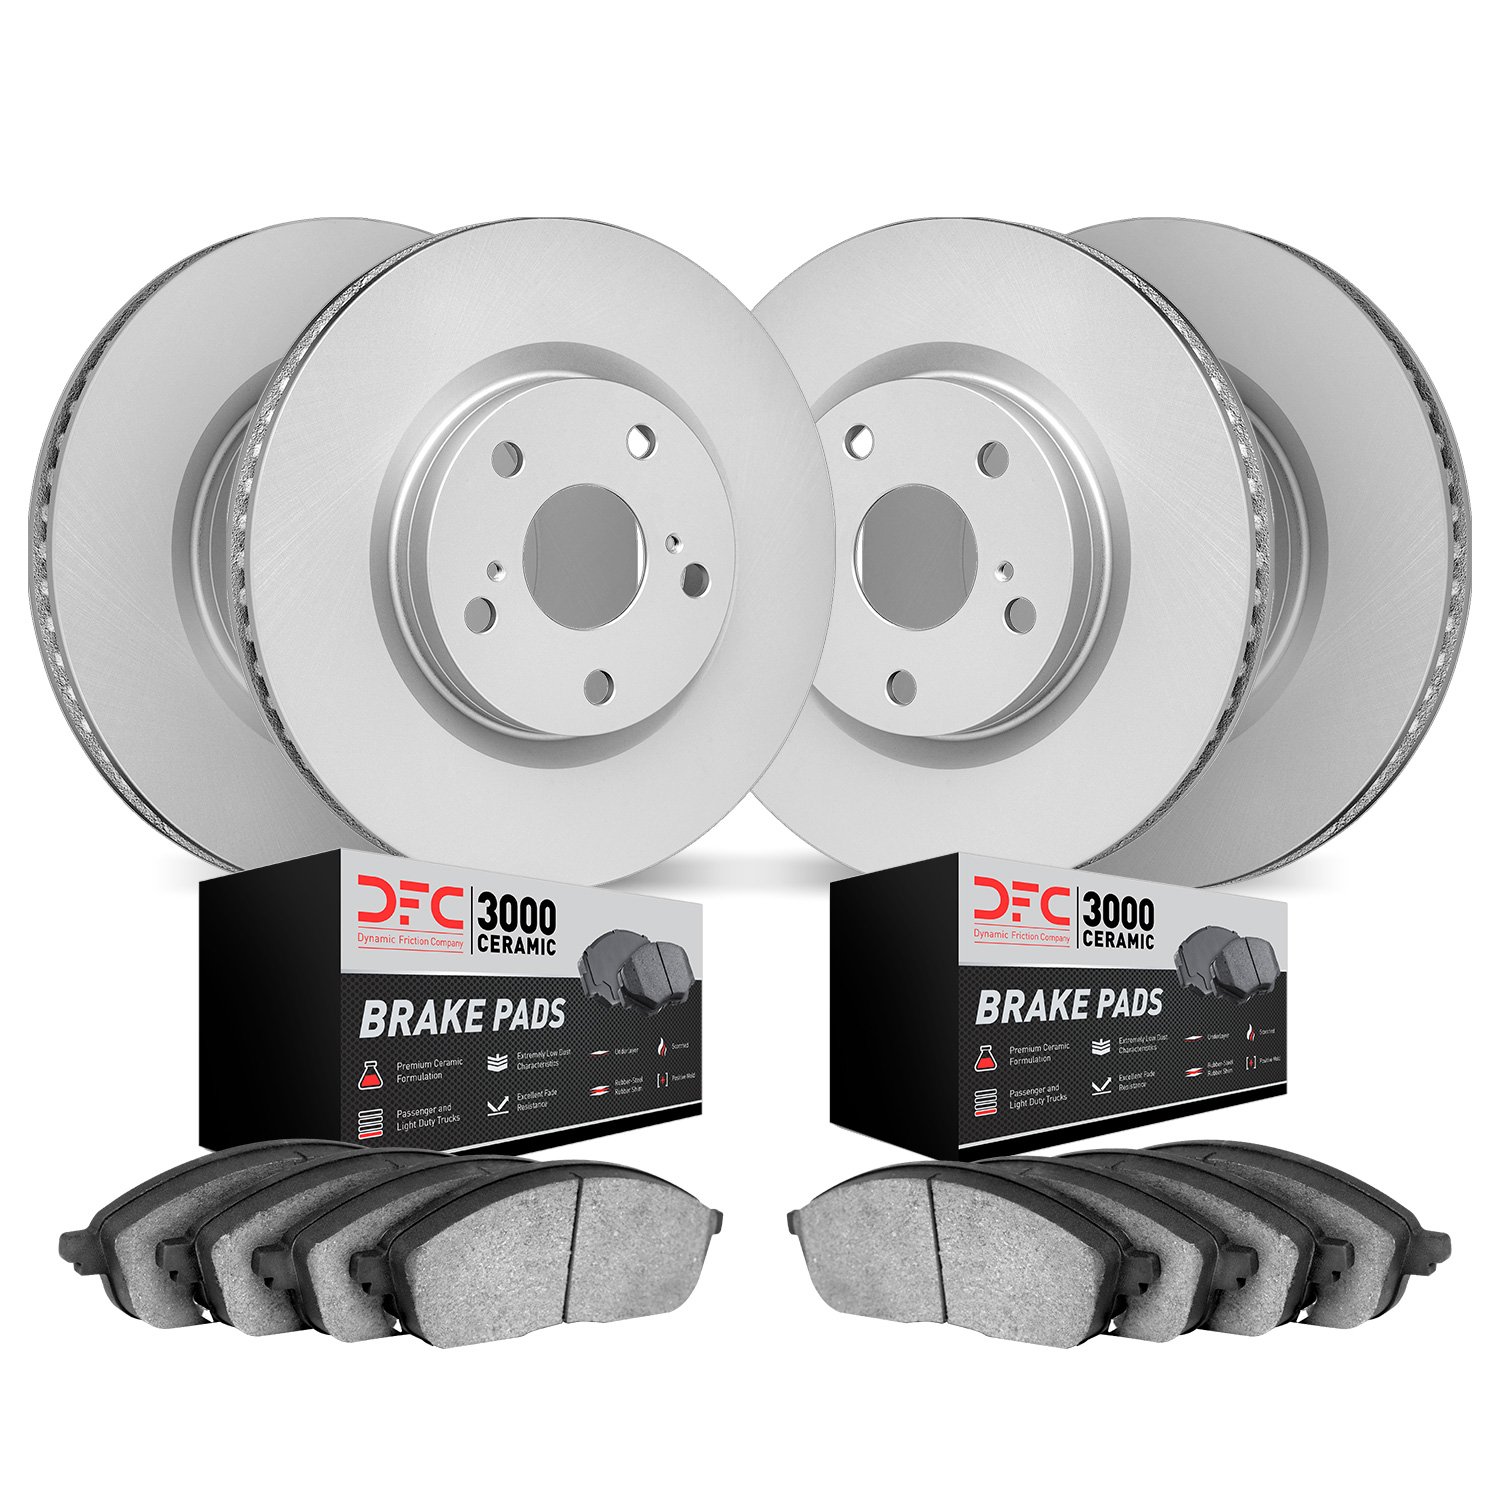 4304-31065 Geospec Brake Rotors with 3000-Series Ceramic Brake Pads Kit, 2013-2018 BMW, Position: Front and Rear